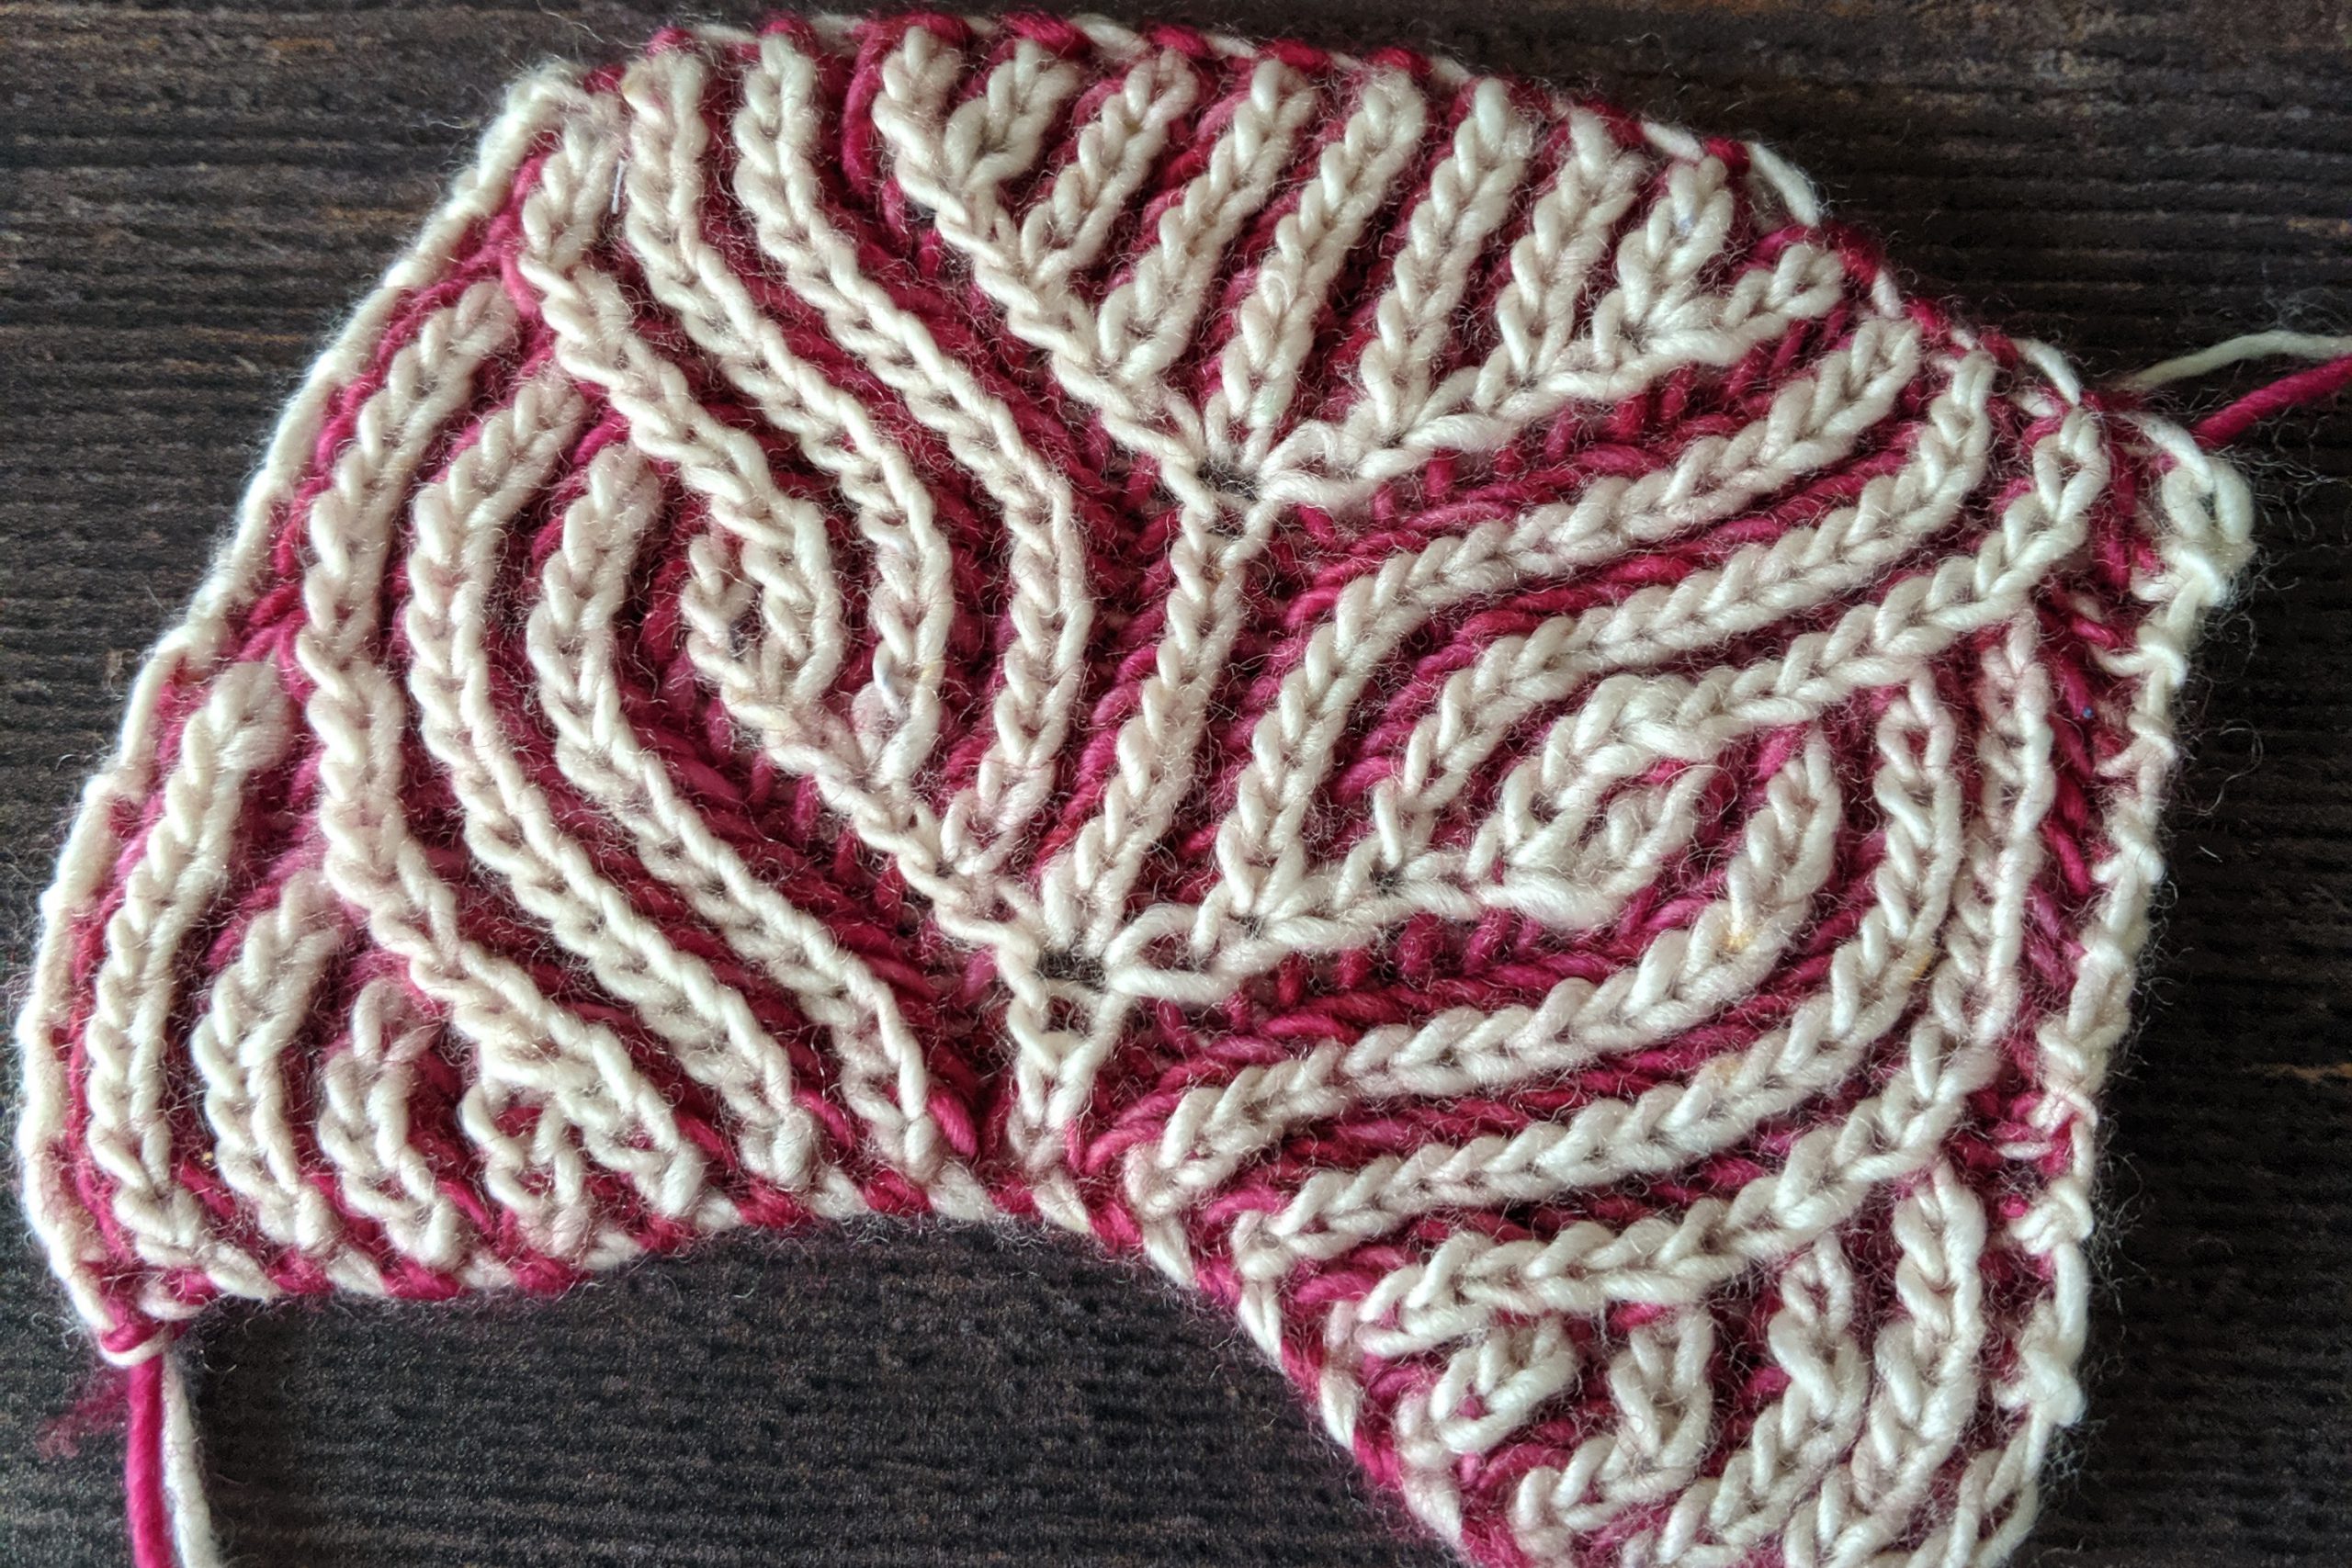 A piece of brioche knitting in pink and white yarn. The pattern resembles an owl.